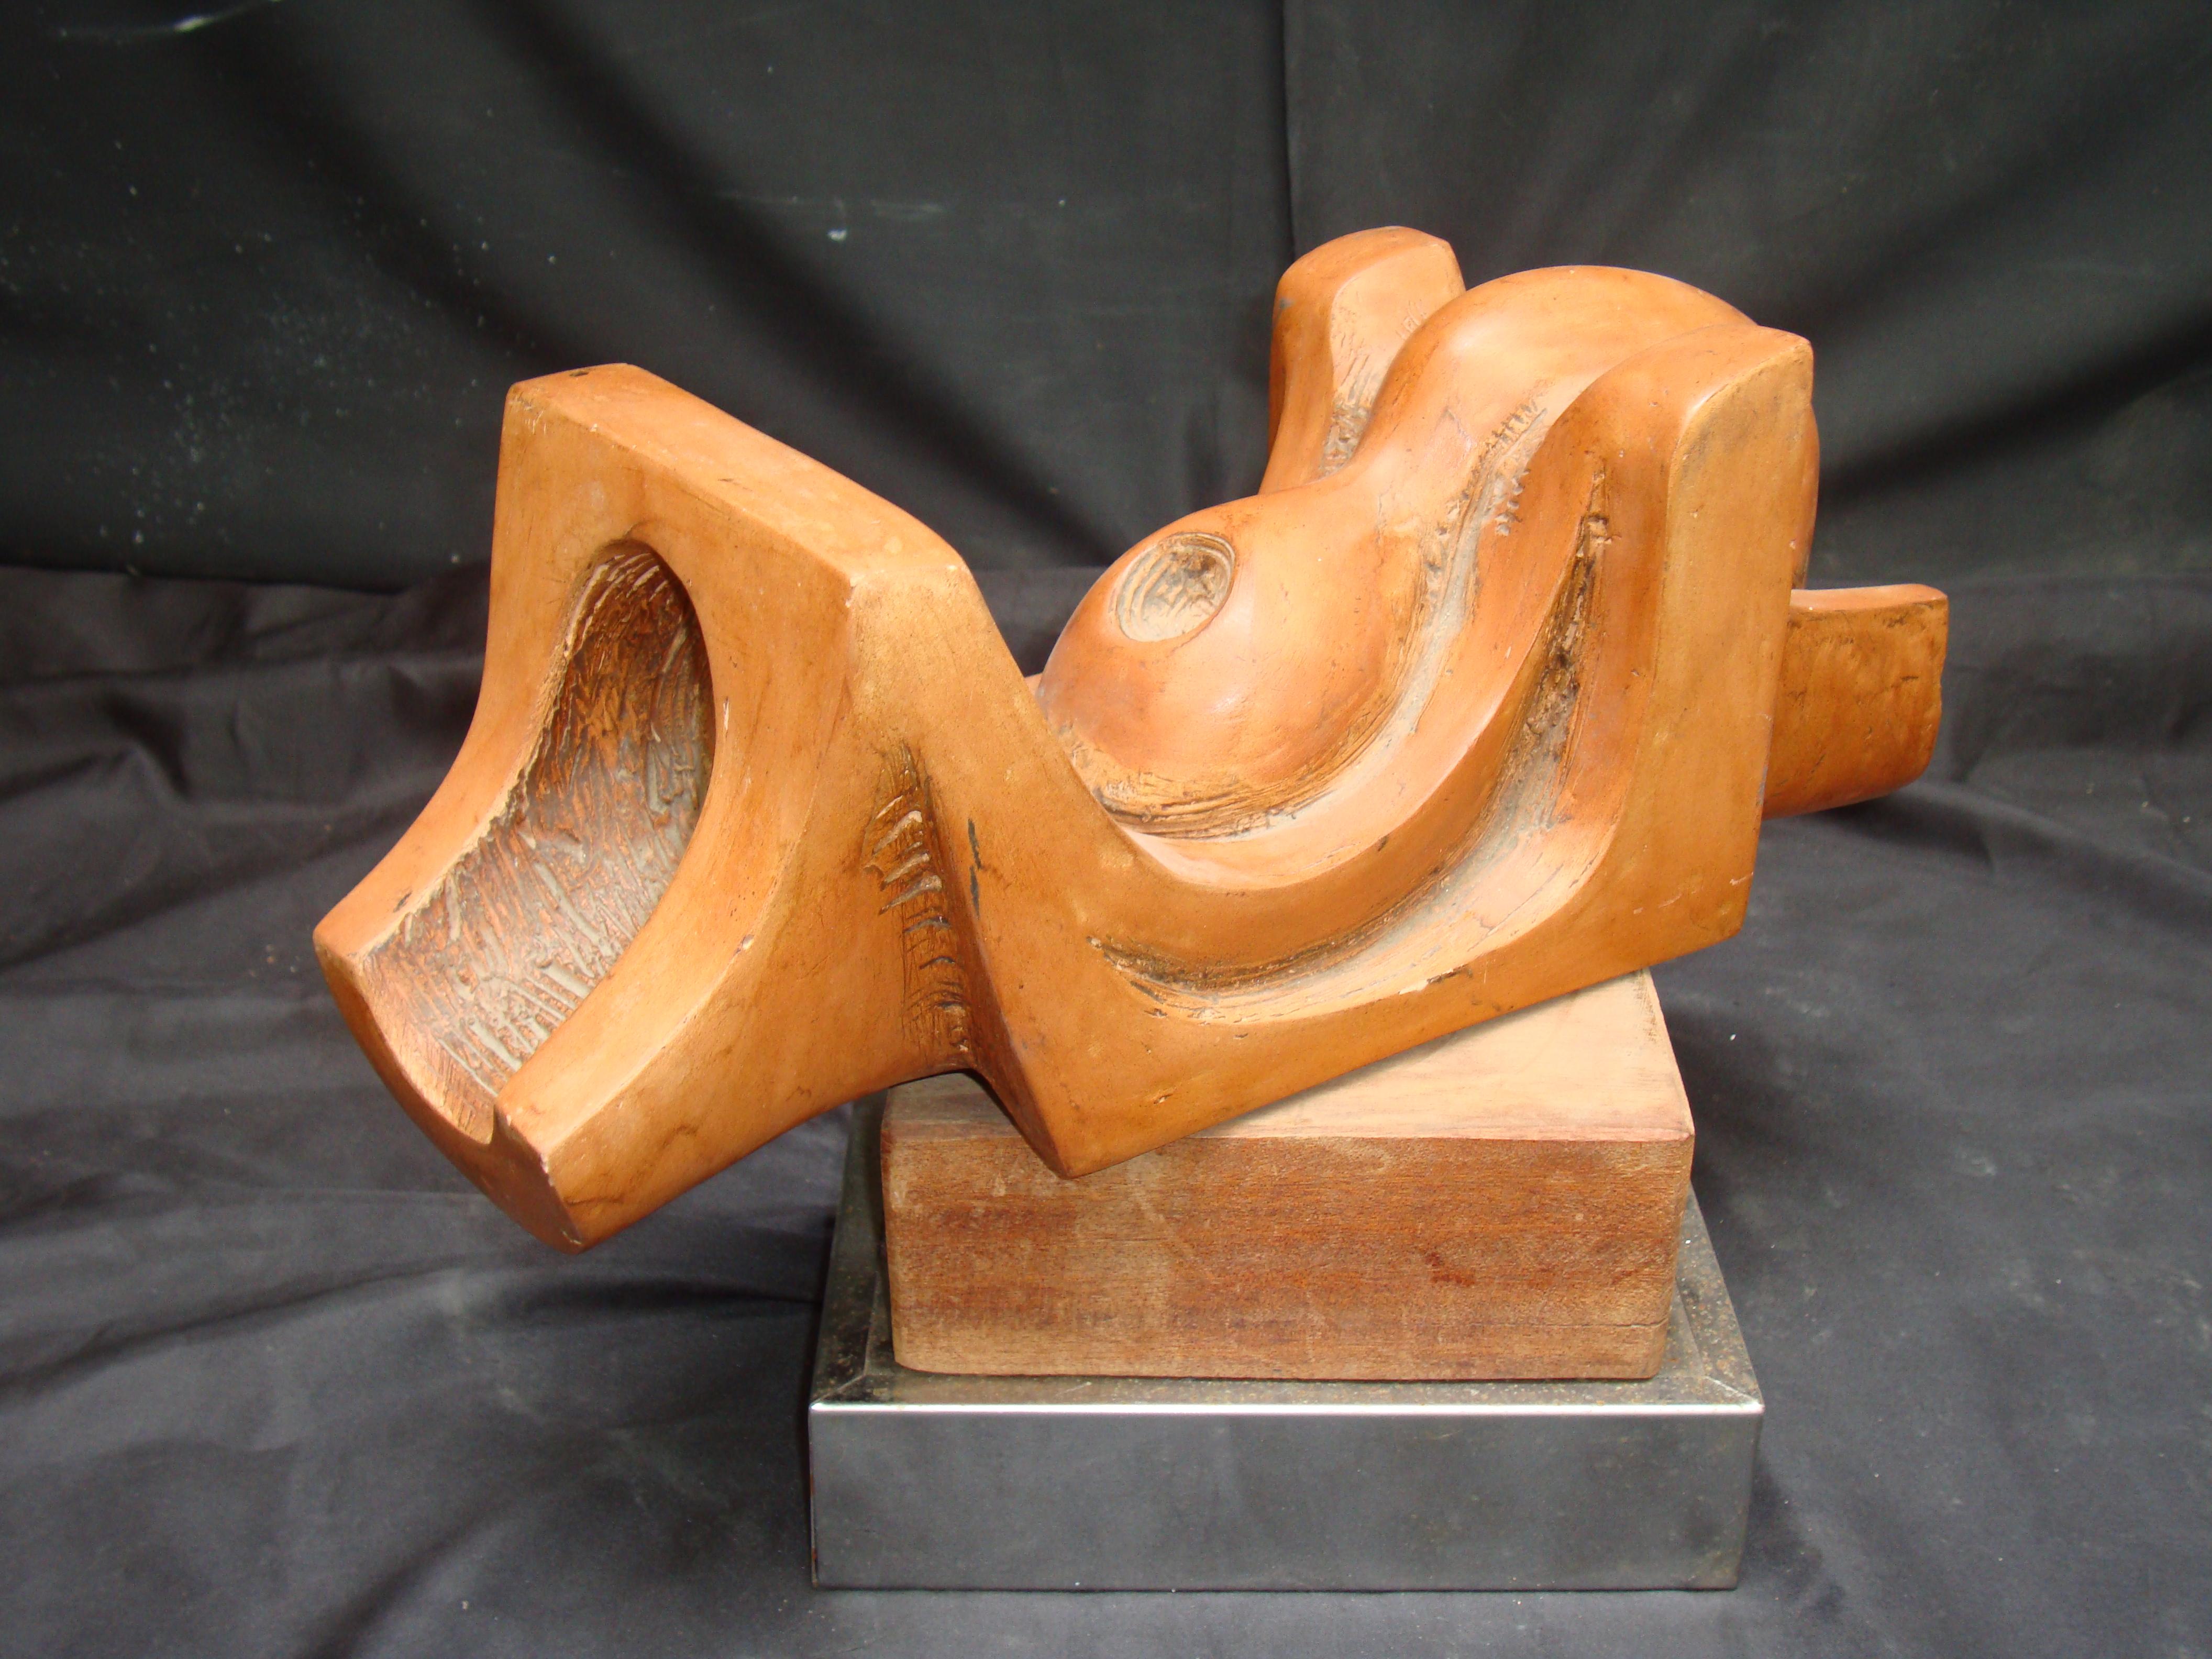 A mid-20th century abstract terracotta sculpture on wooden base, very articulated composition and shape. Signed T. Assi.